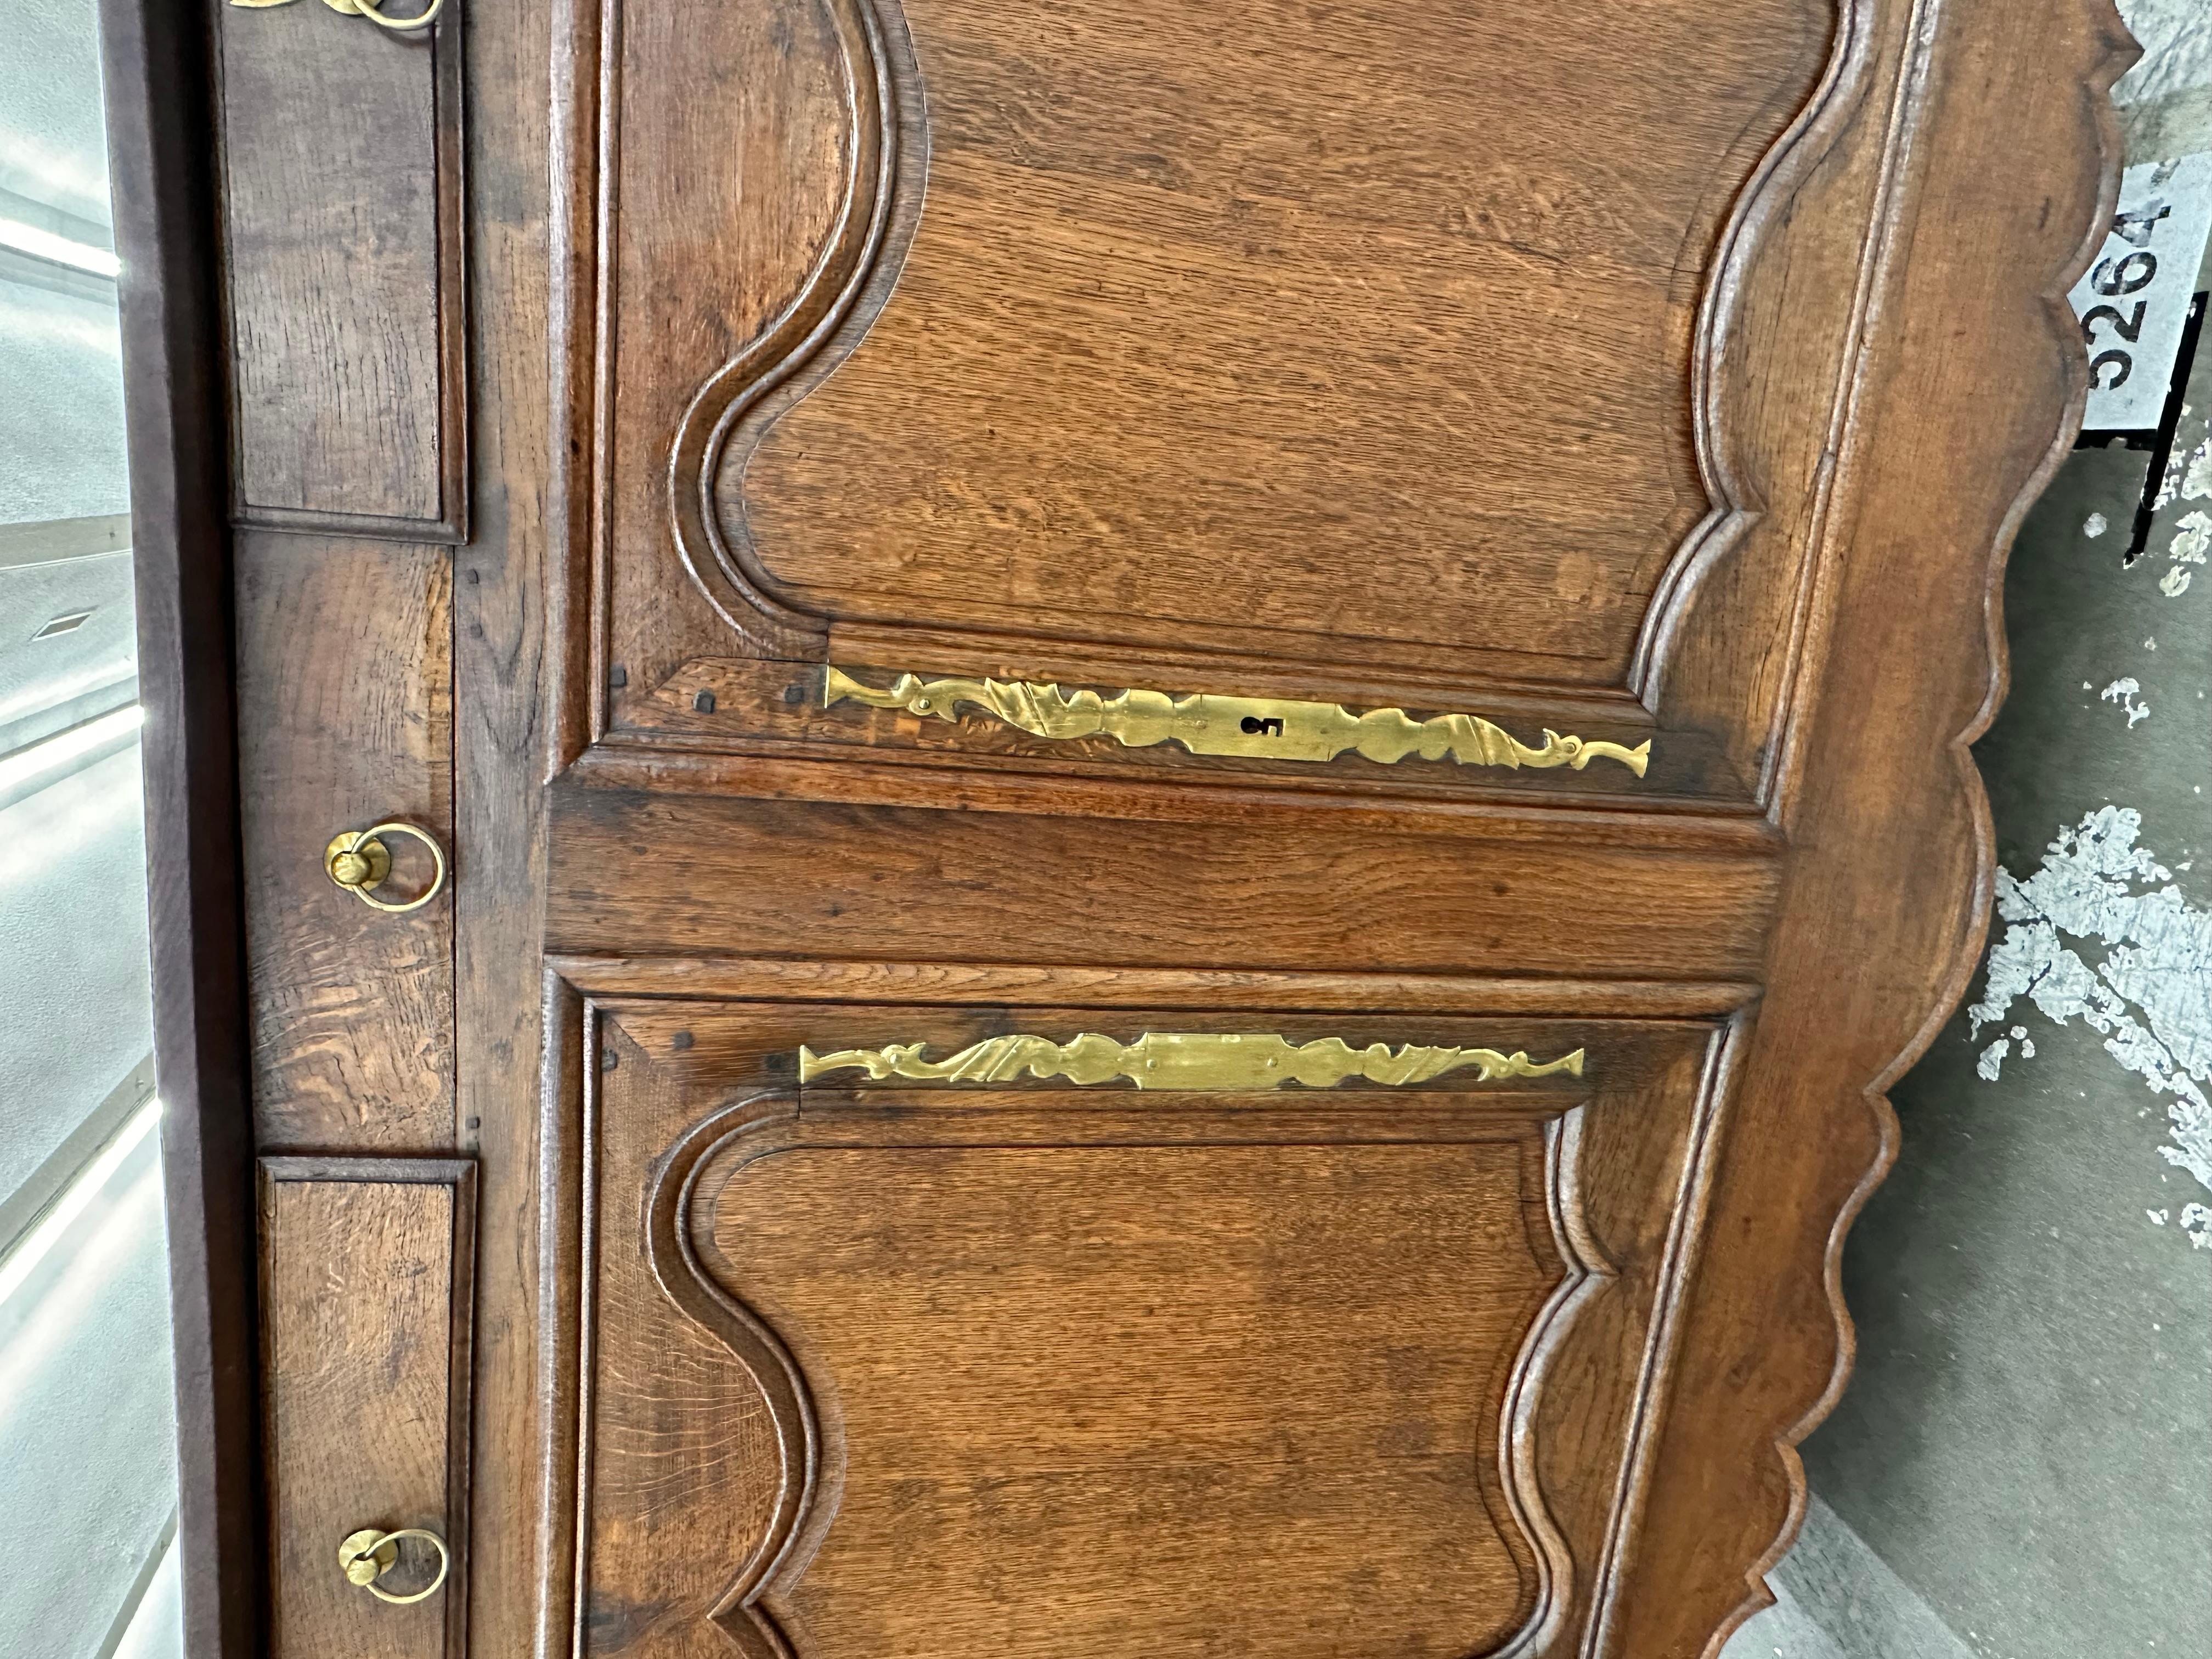 Fresh out of normandy, France is this early 1800s server .Look at the amazing detail on the doors as well as the hardware the French done such a fabulous job with their hinges and their metal work on these old pieces. The small drawer replicates a